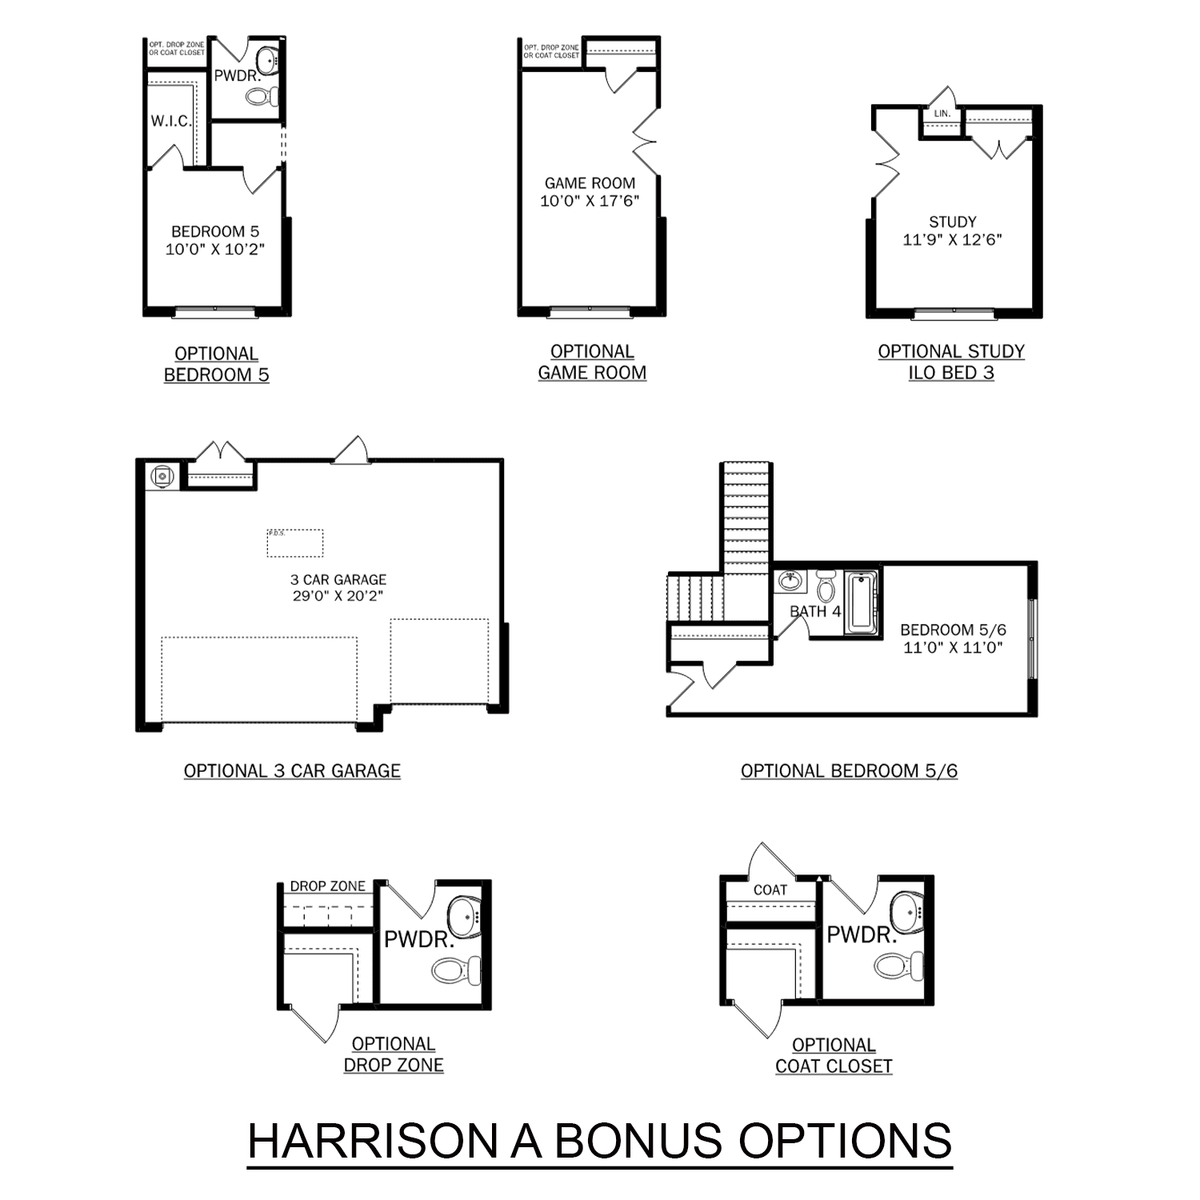 3 - The Harrison with Bonus floor plan layout for 101 Nellies Way in Davidson Homes' Pikes Ridge community.